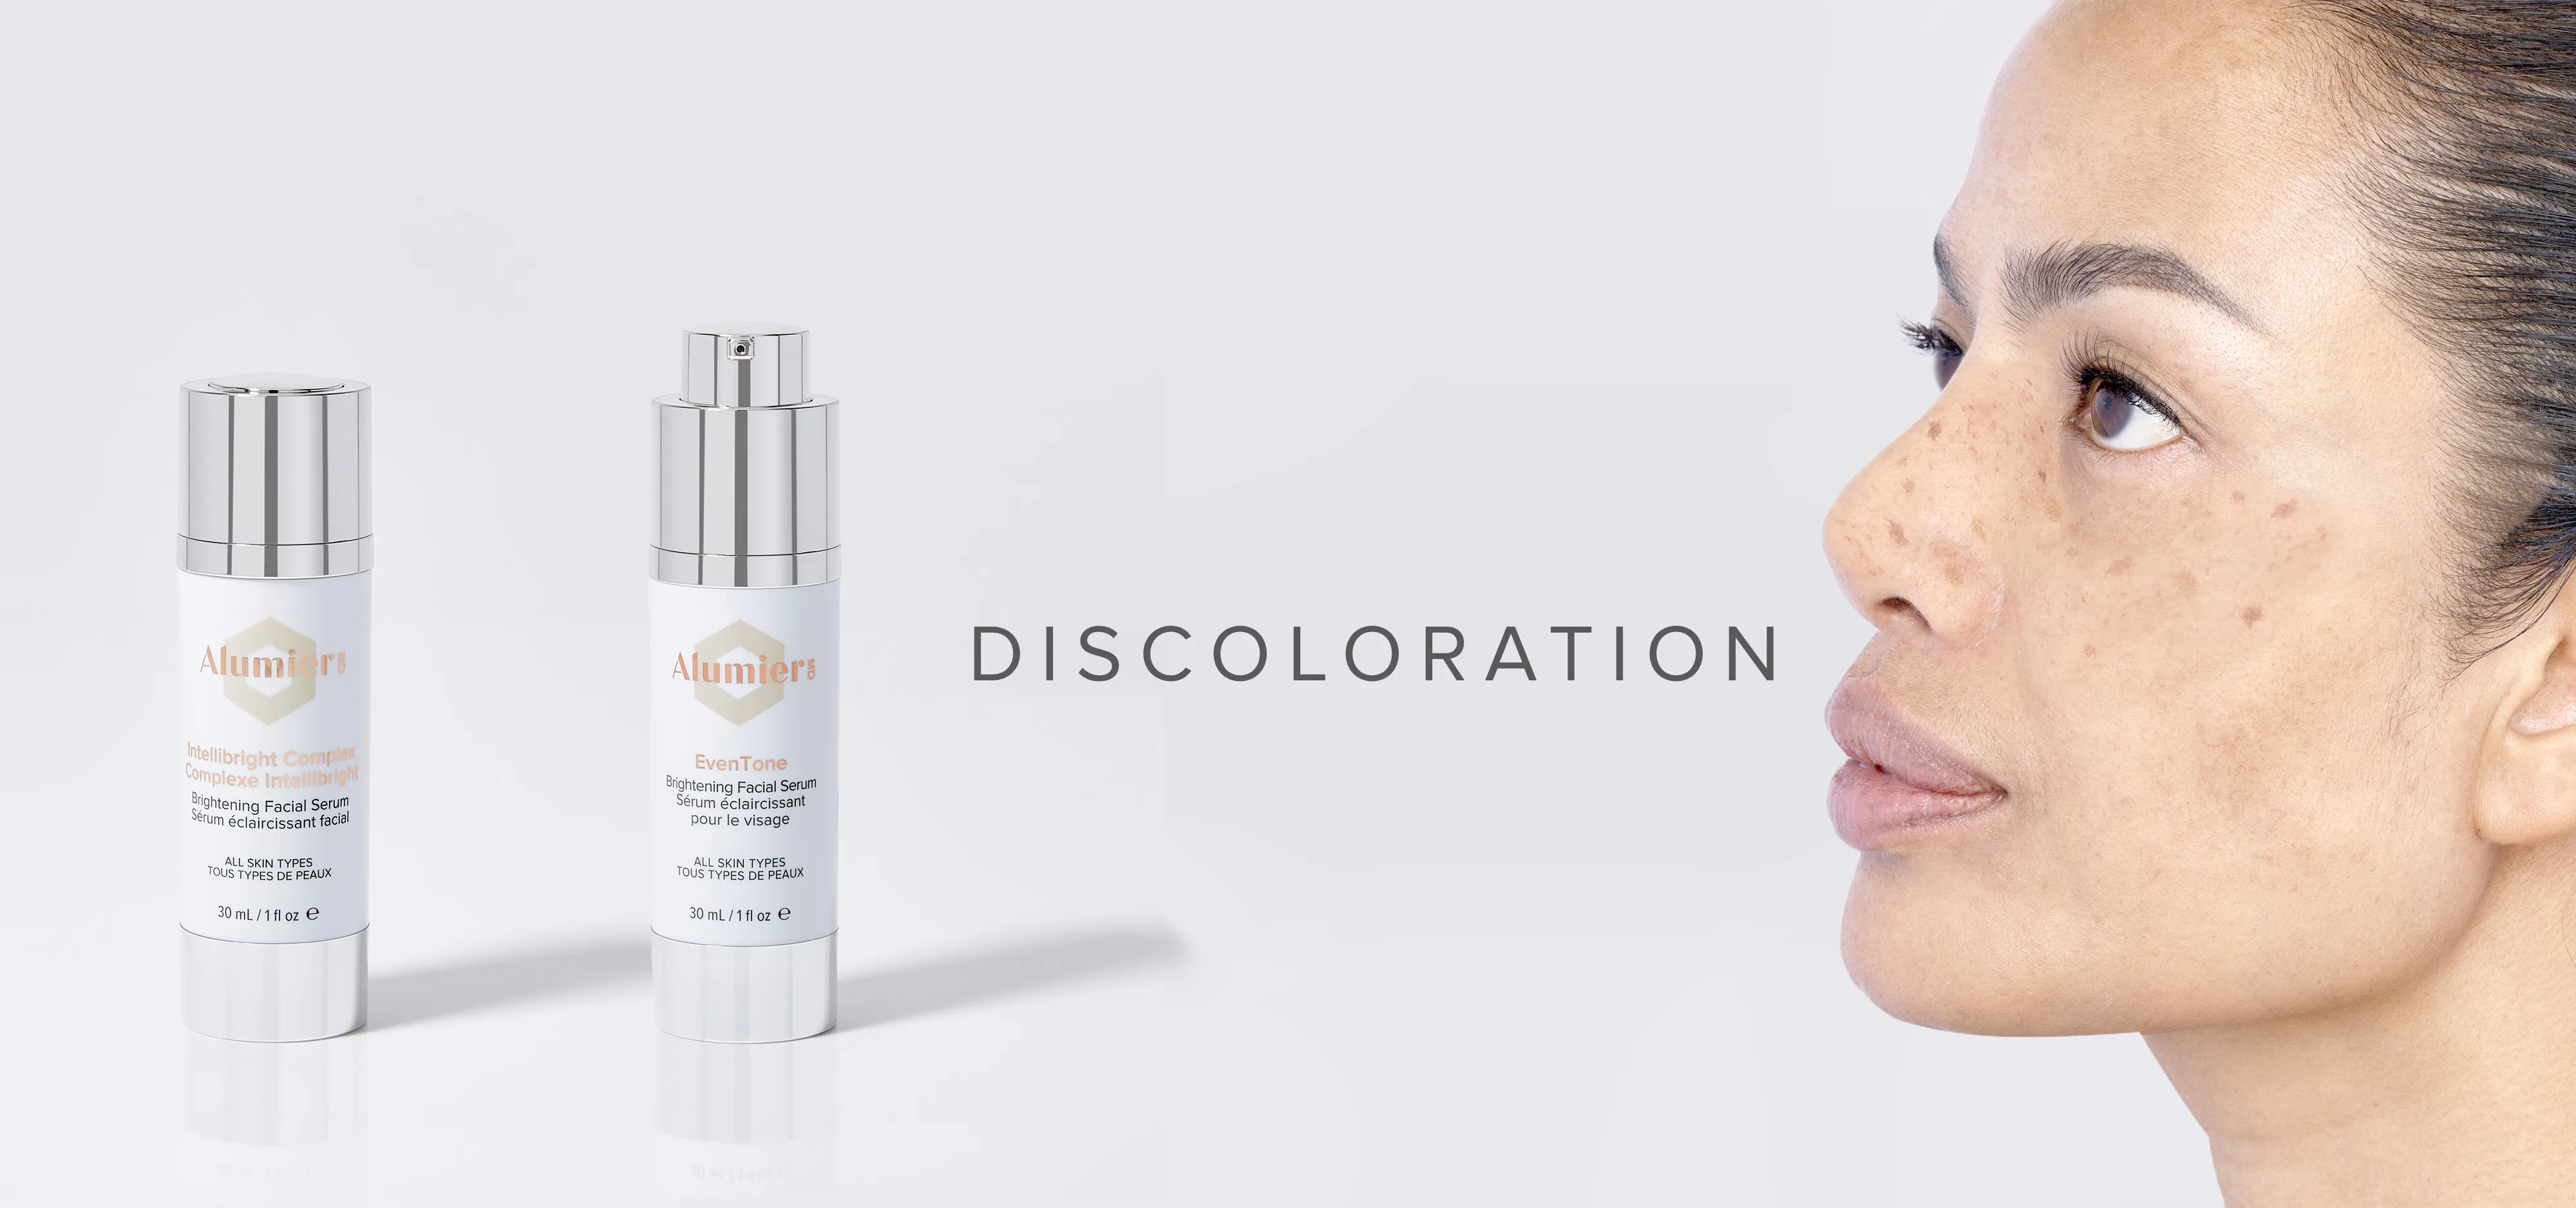 Skin Discolouration products: Intellibright Complex and EvenTone bottles